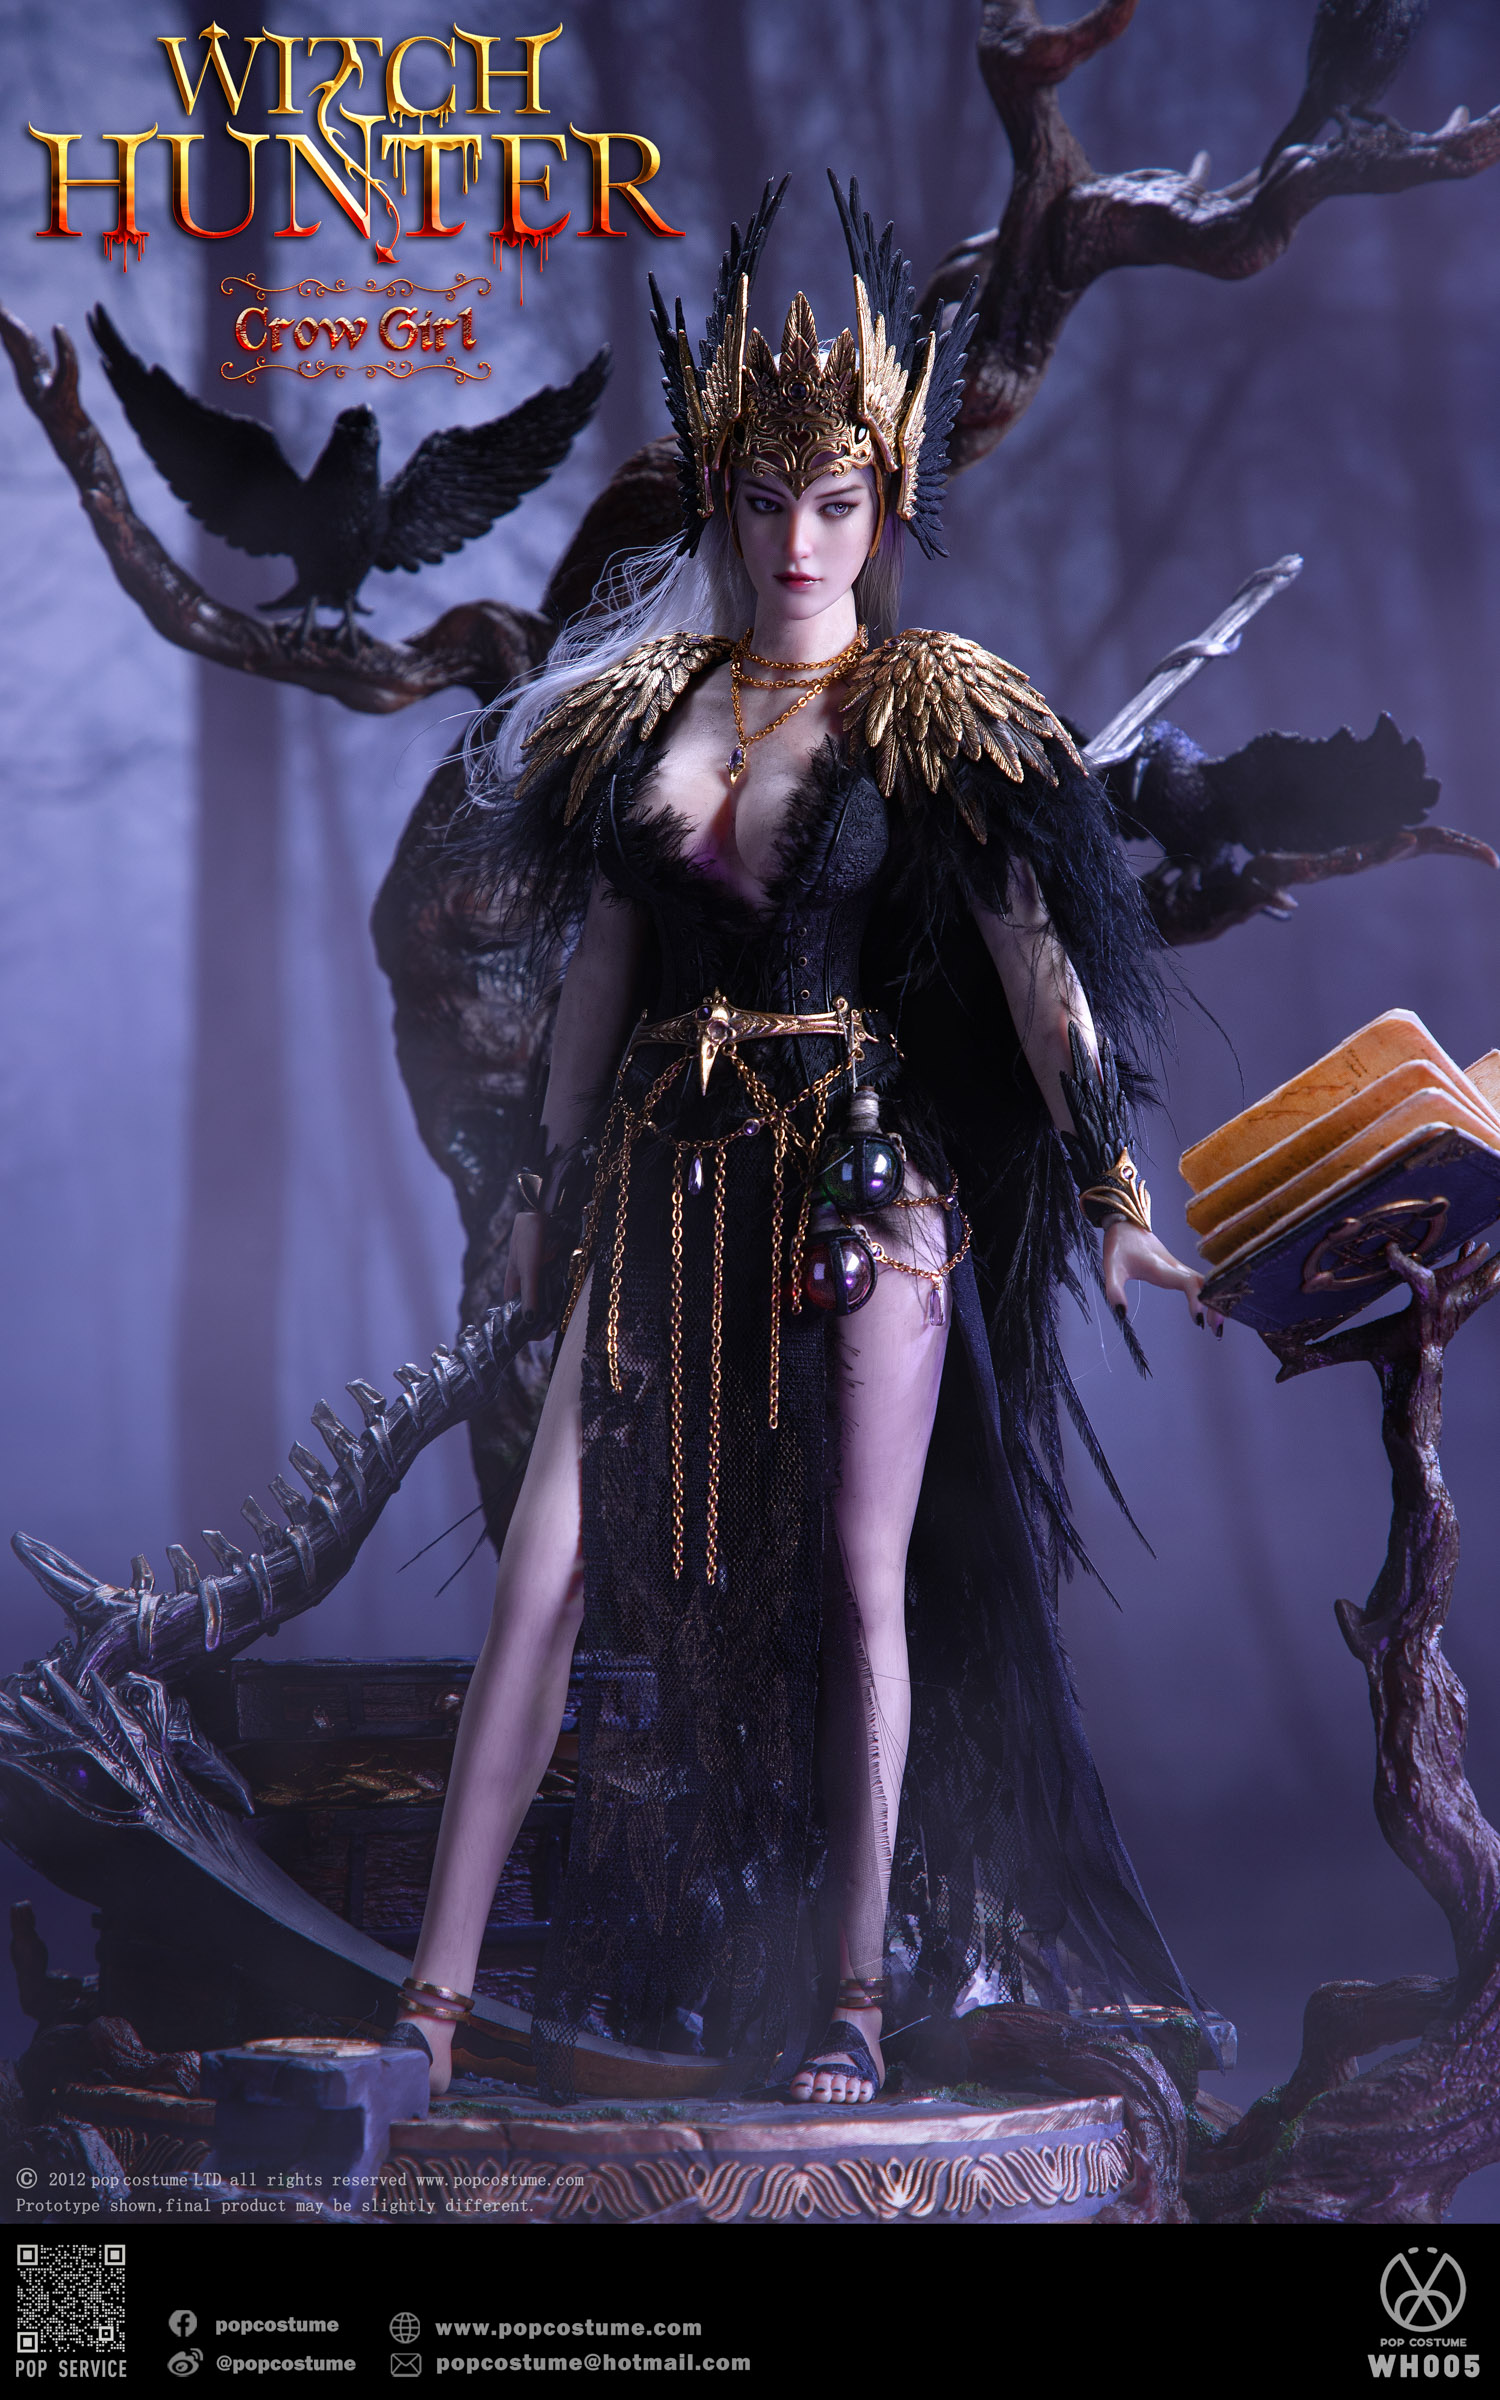 POP COSTUME 1/6 WH004 Witch H unter Series-The Crow Girl